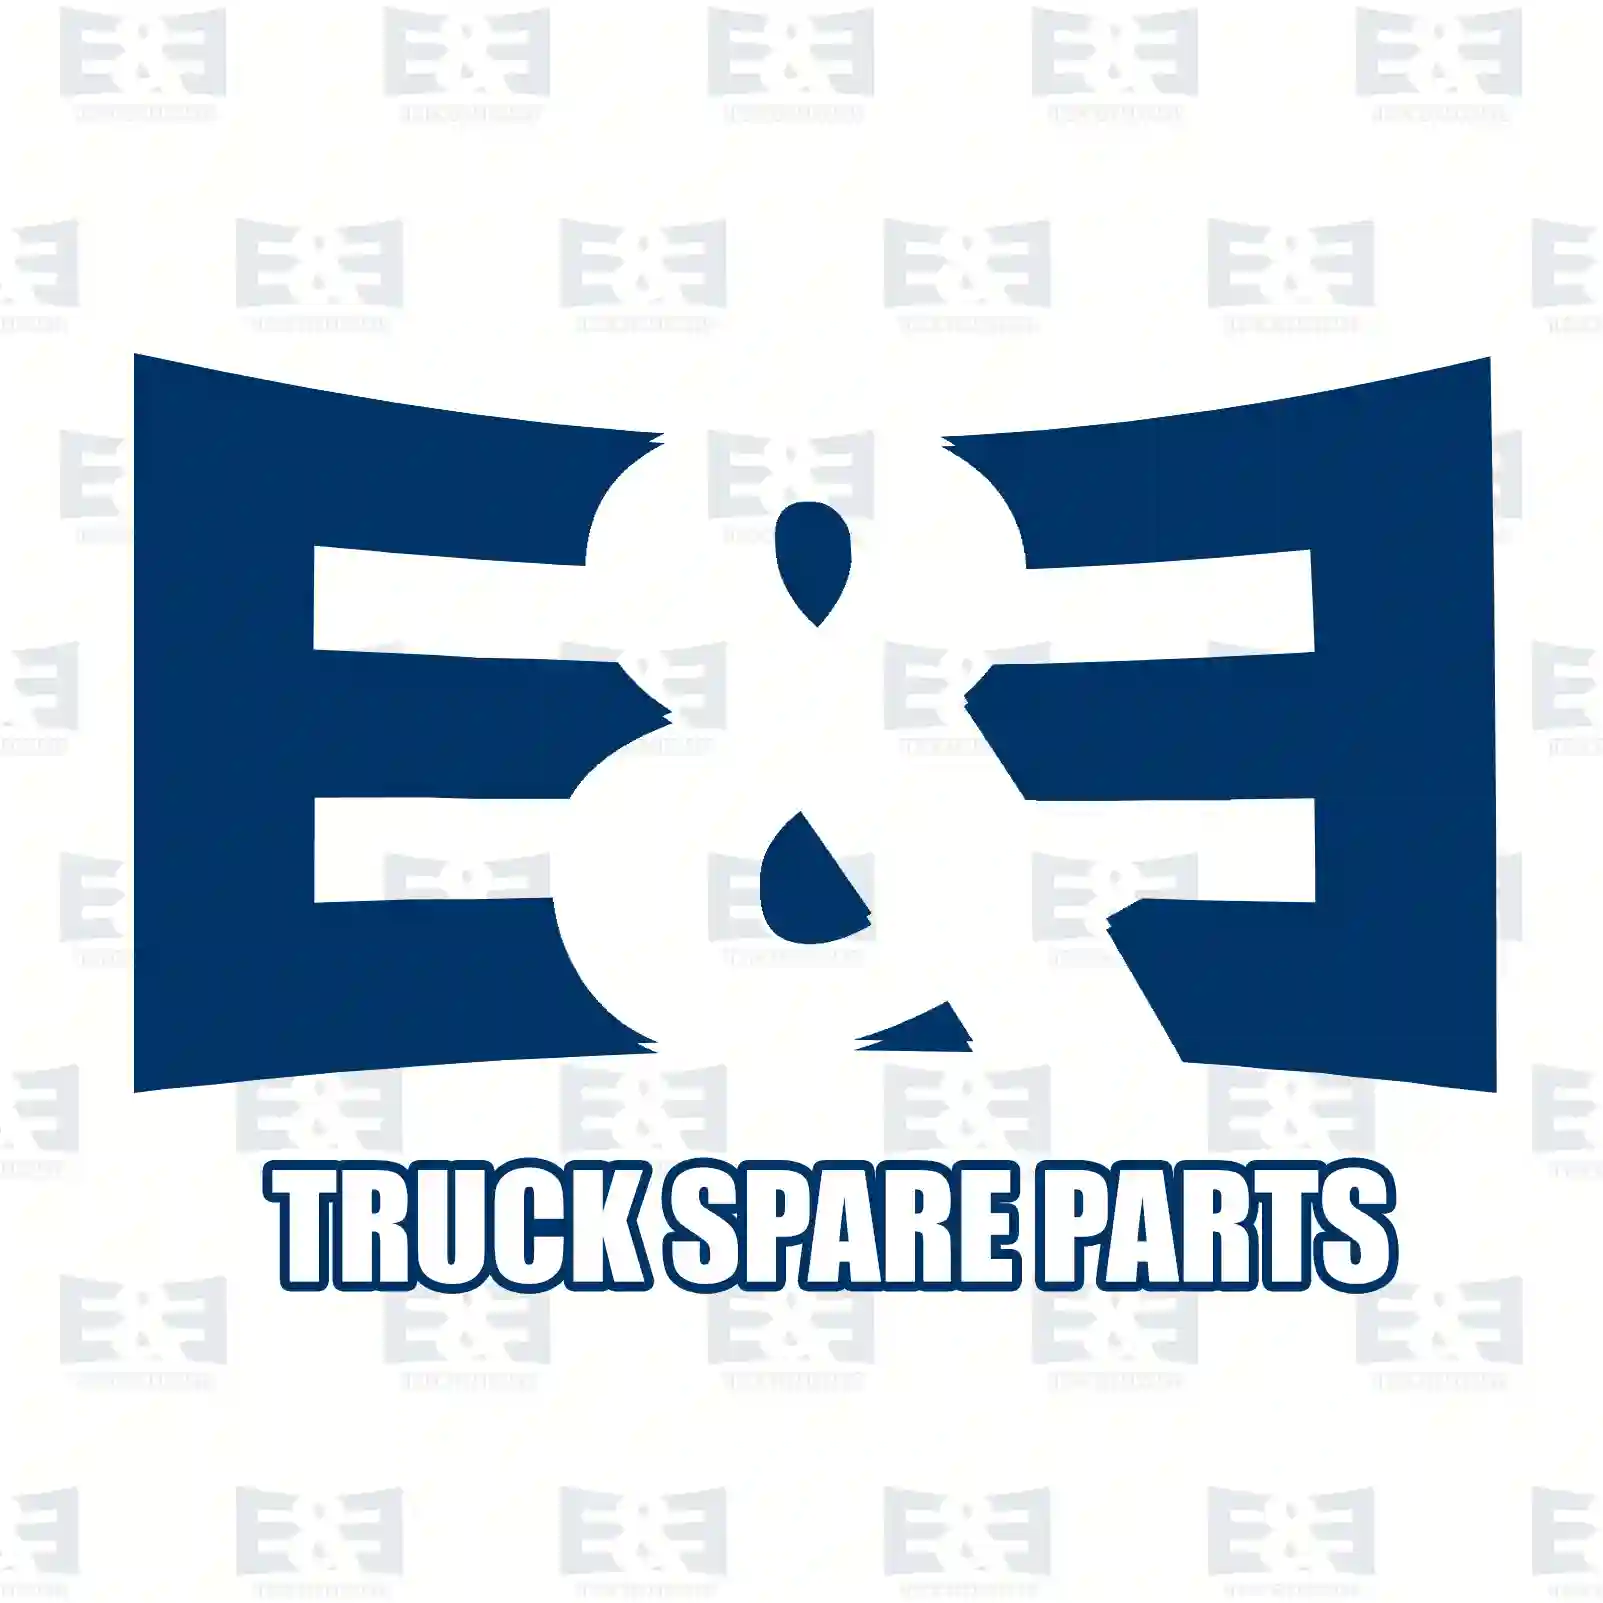  Screw with washer || E&E Truck Spare Parts | Truck Spare Parts, Auotomotive Spare Parts